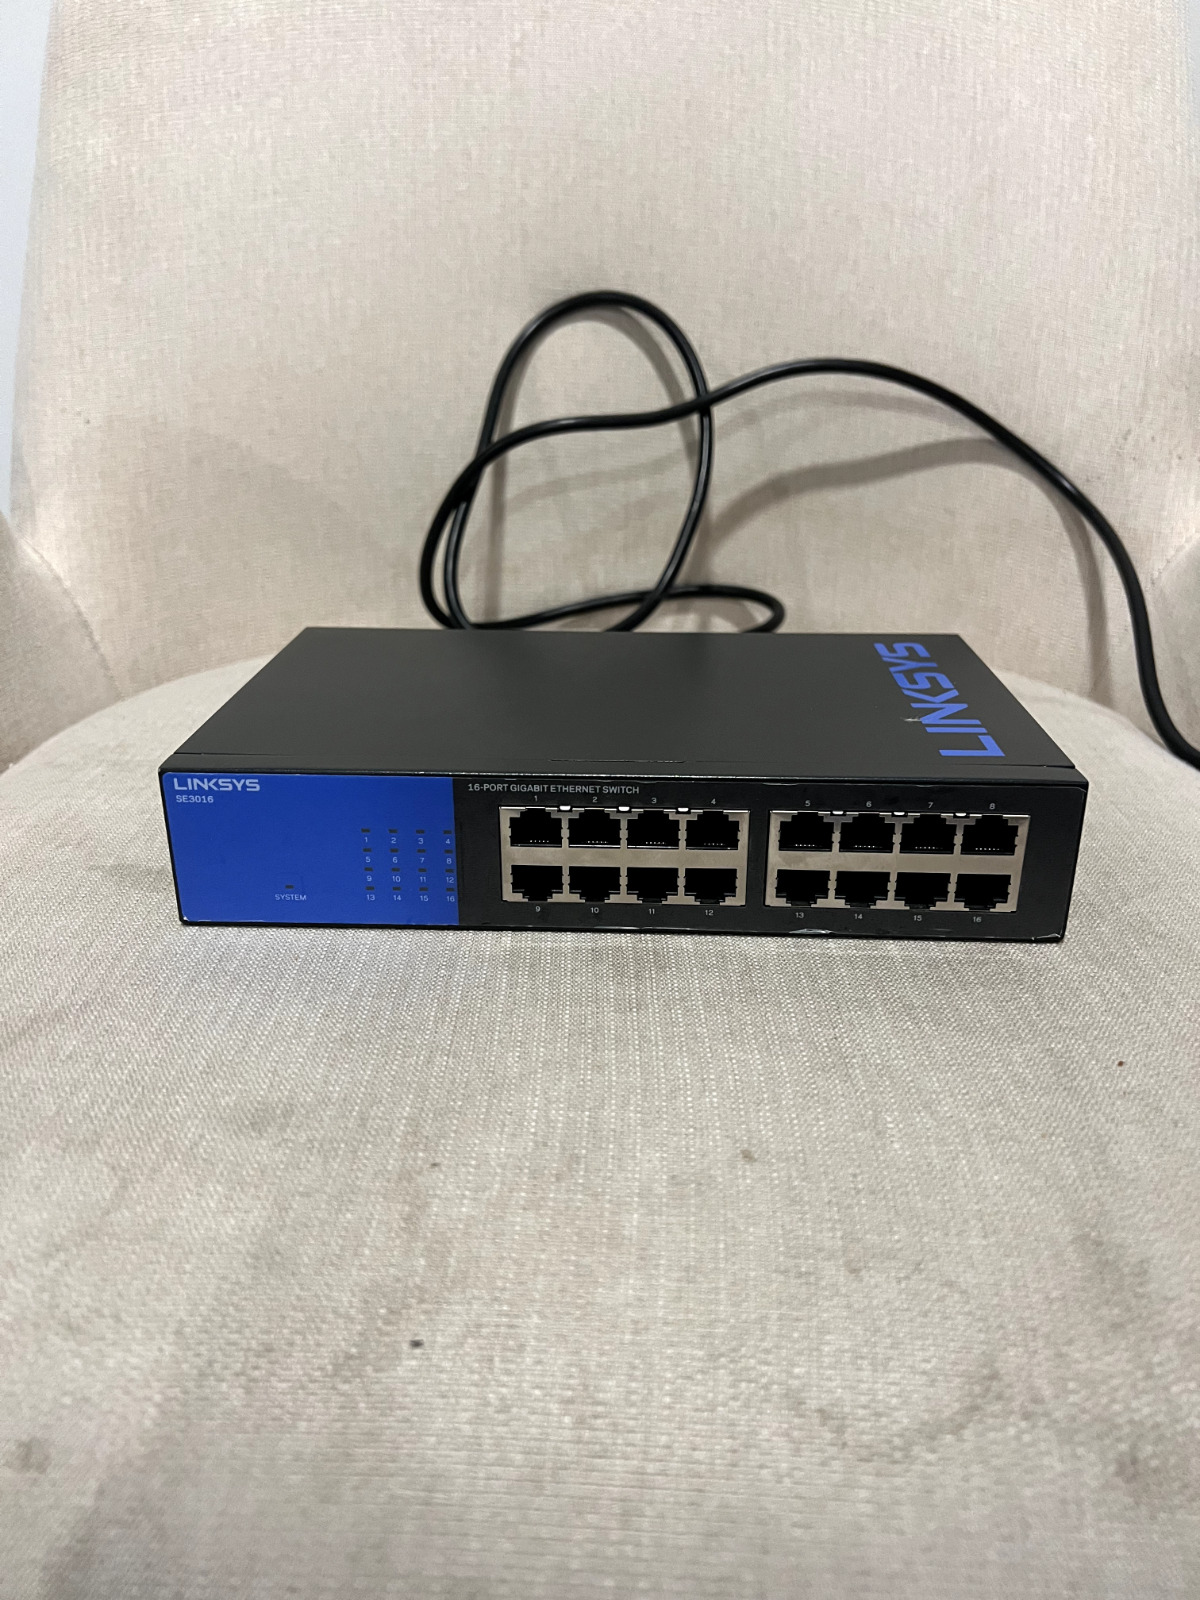 Linksys 16 port switch - SE3016 - Used - Great Condition